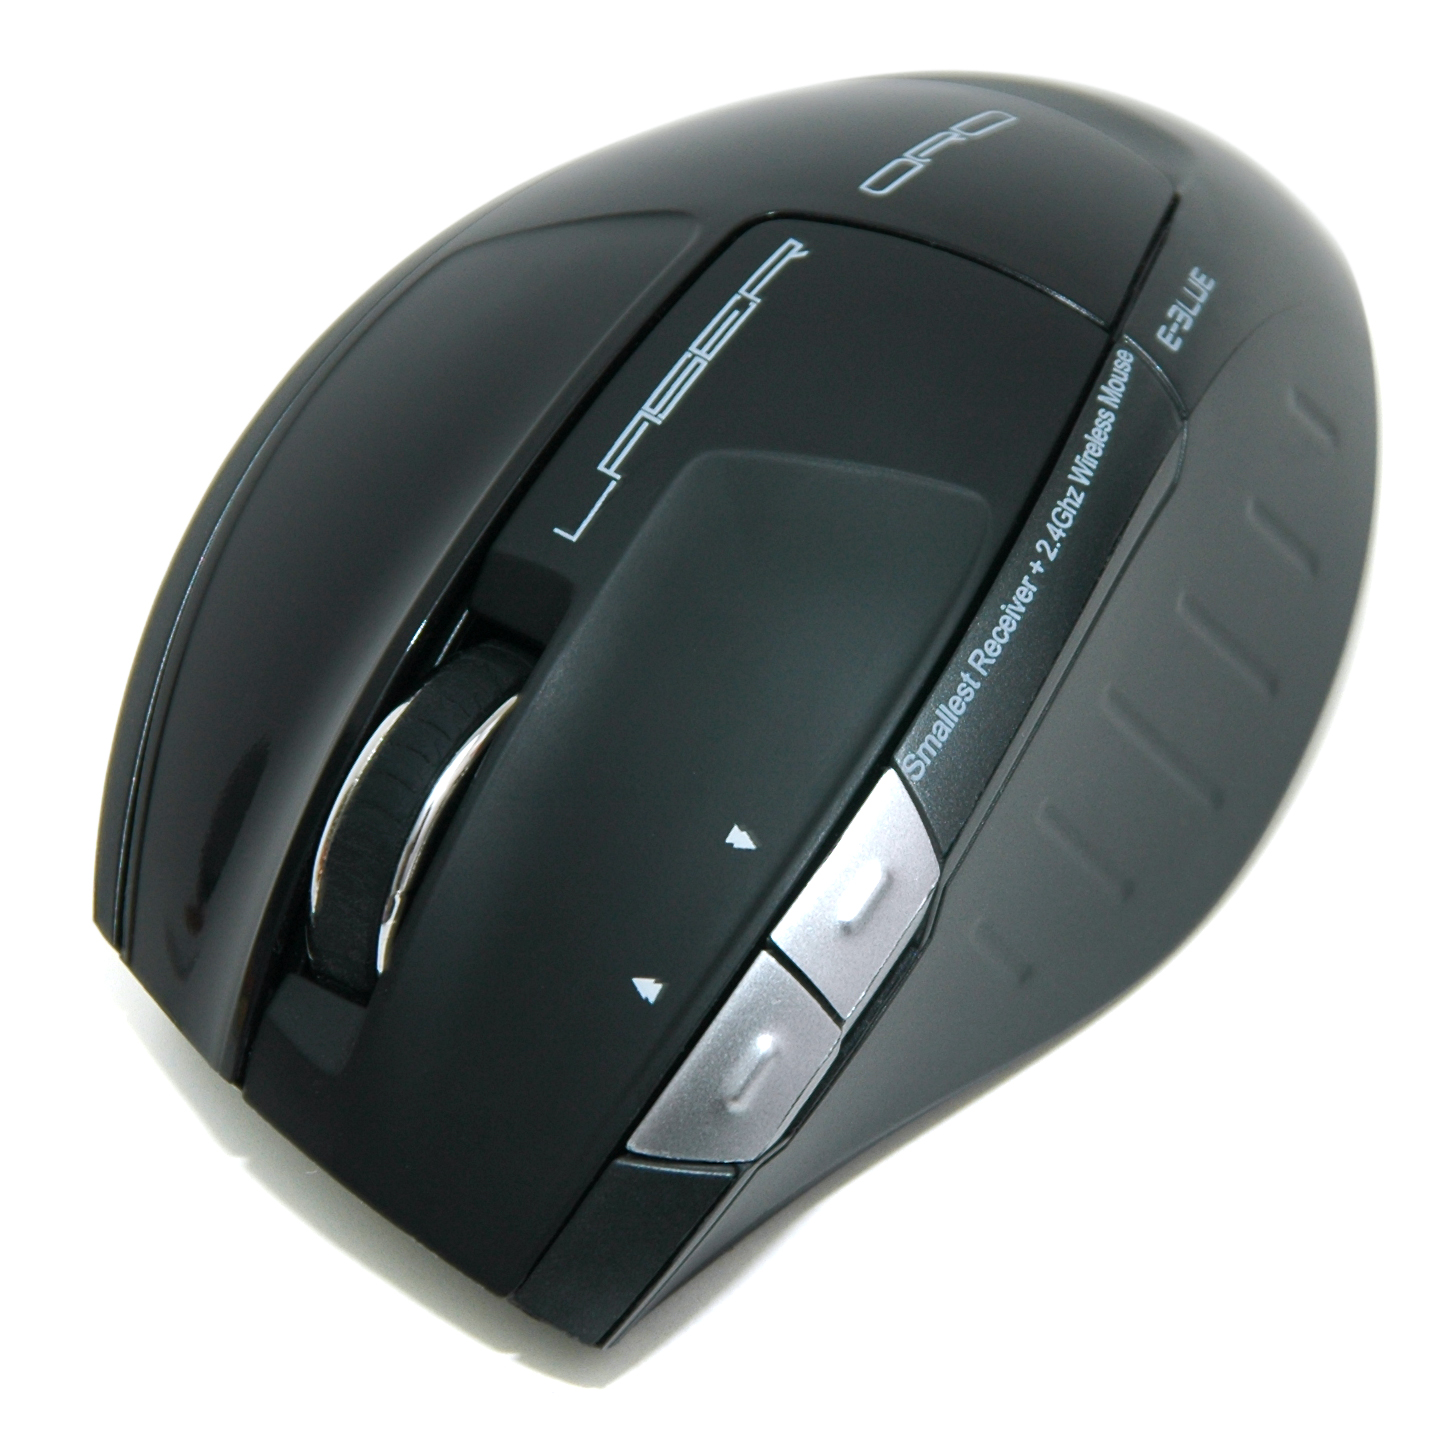 Oro 2.4G Wireless Laser Mouse